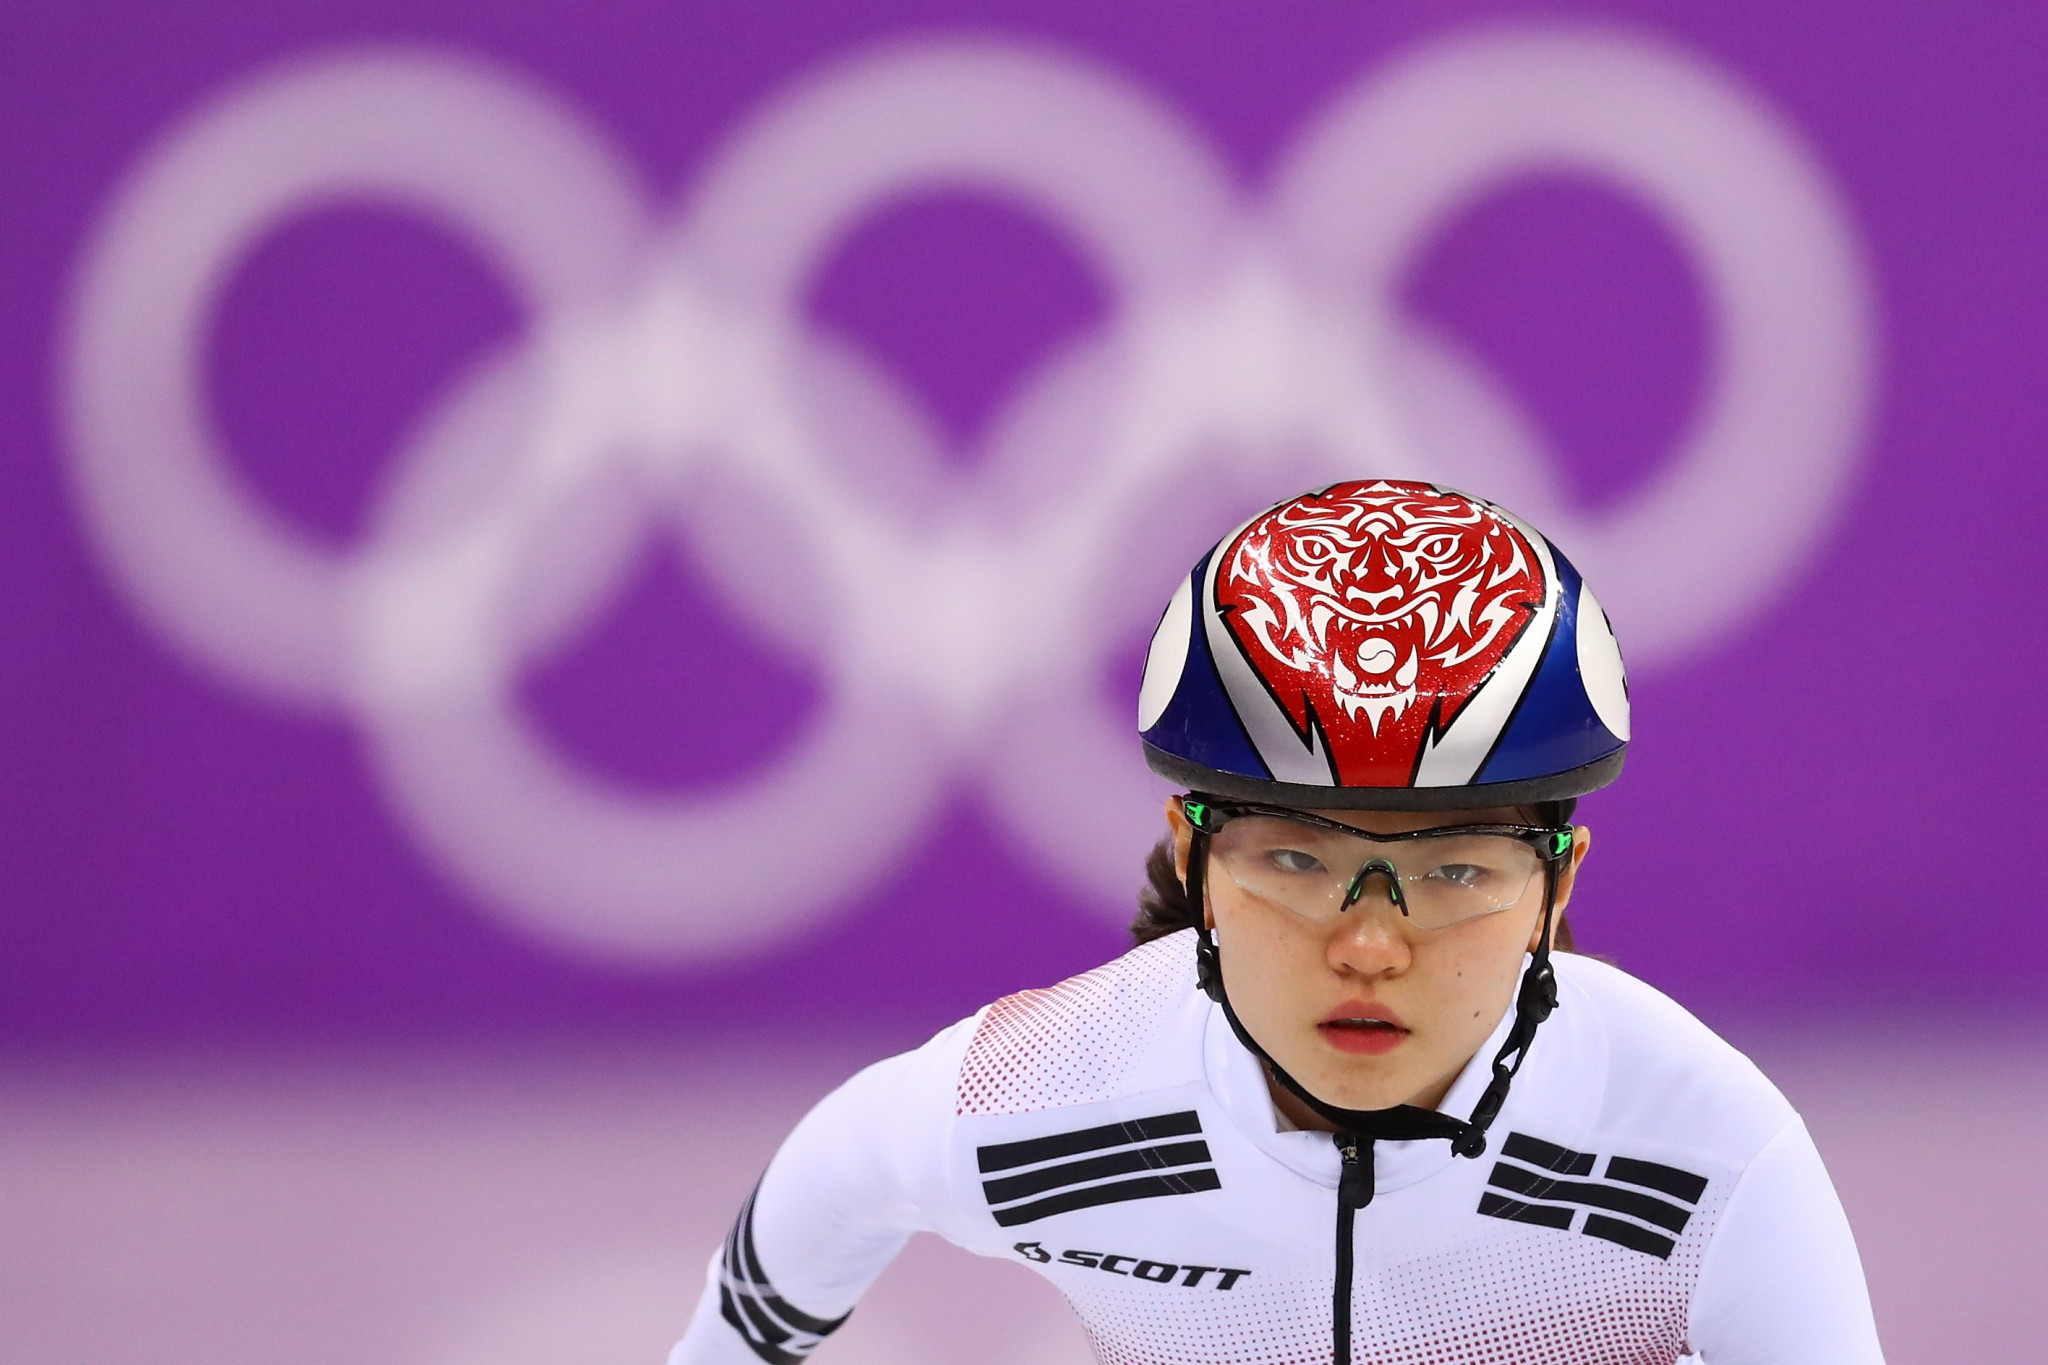 Human rights group to launch extensive investigation into abuse claims in South Korean sport